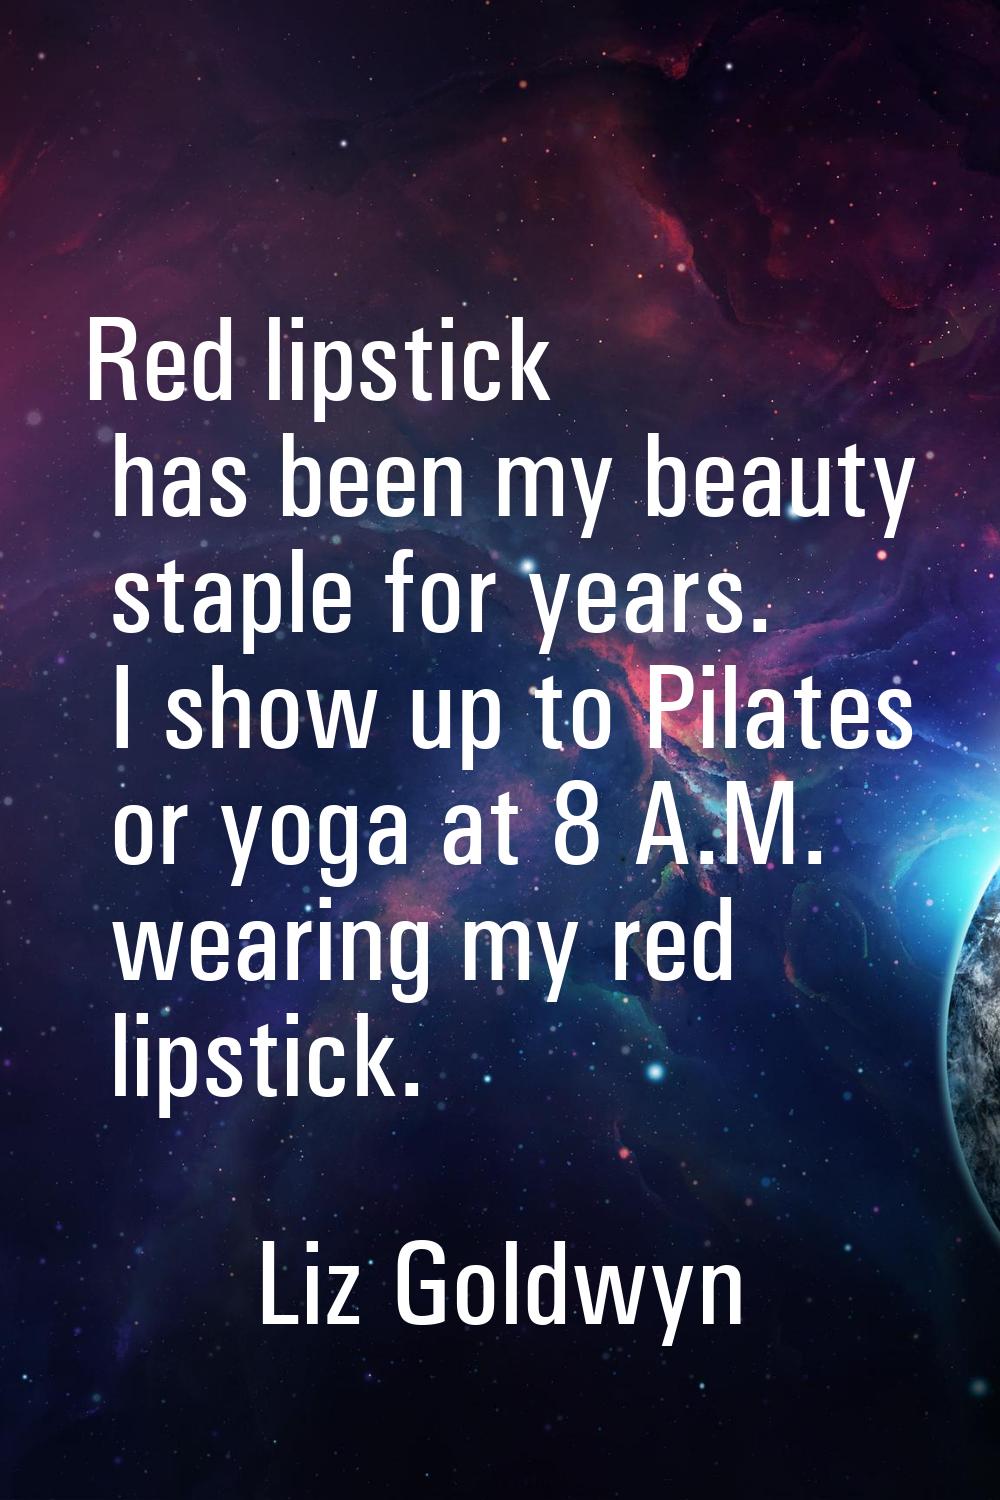 Red lipstick has been my beauty staple for years. I show up to Pilates or yoga at 8 A.M. wearing my